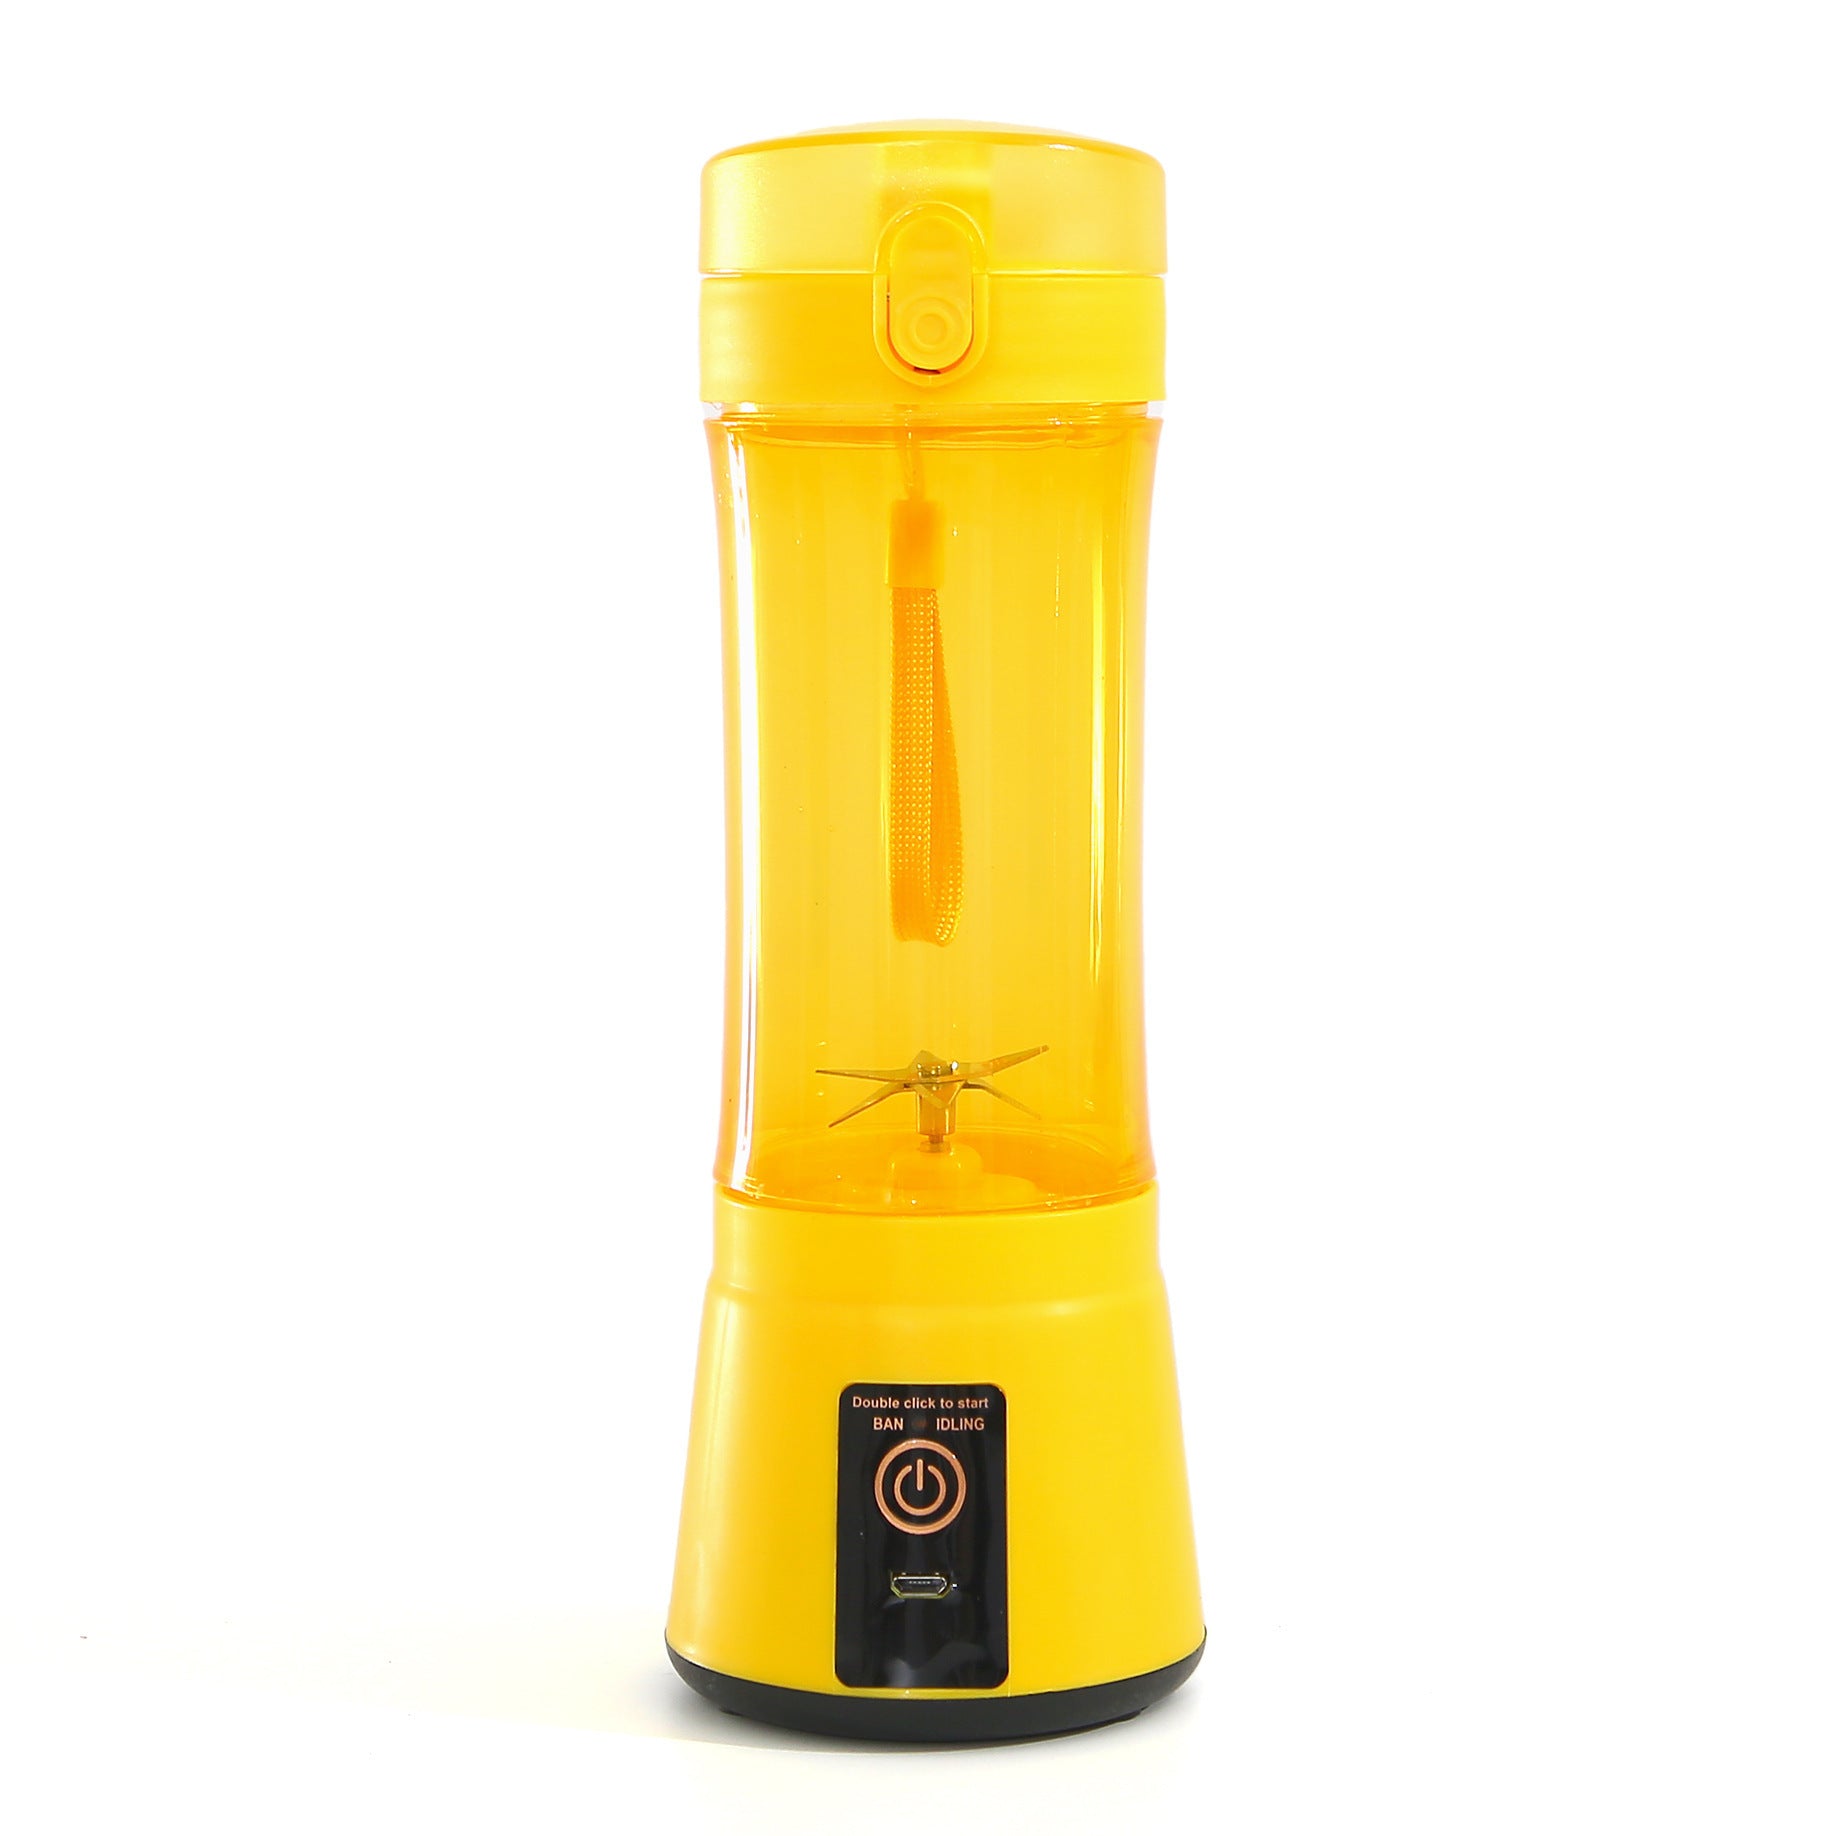 Chargeable Blender - Shakes/Smoothie (Free Shipping)